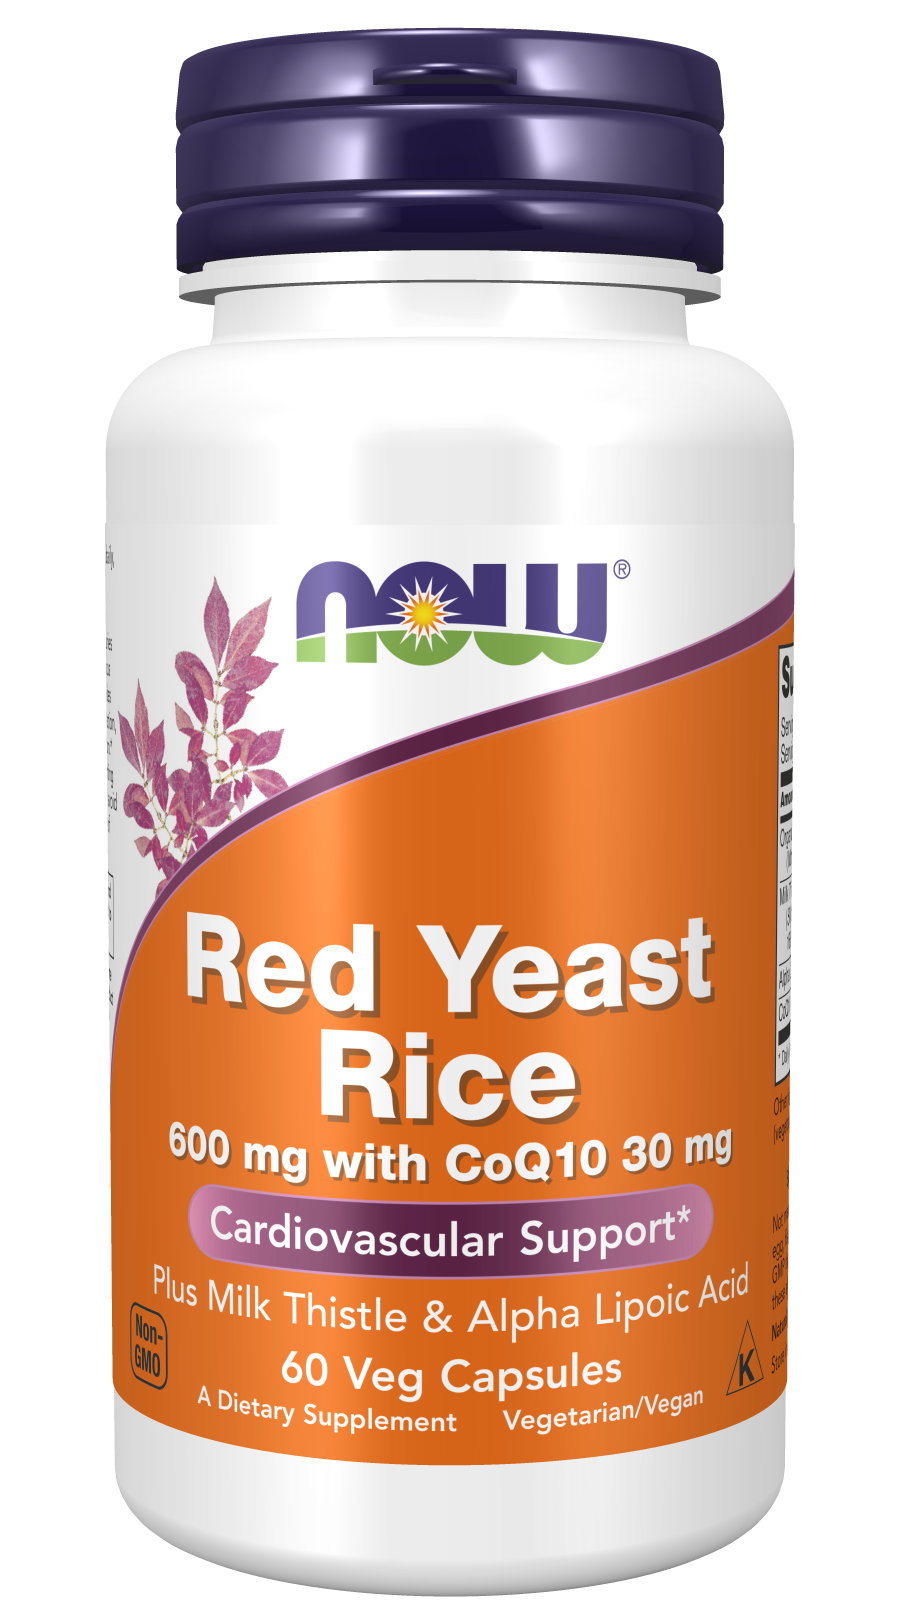 Red Yeast Rice 600 mg with CoQ10 30 mg - 60 Veg Capsules Bottle Front